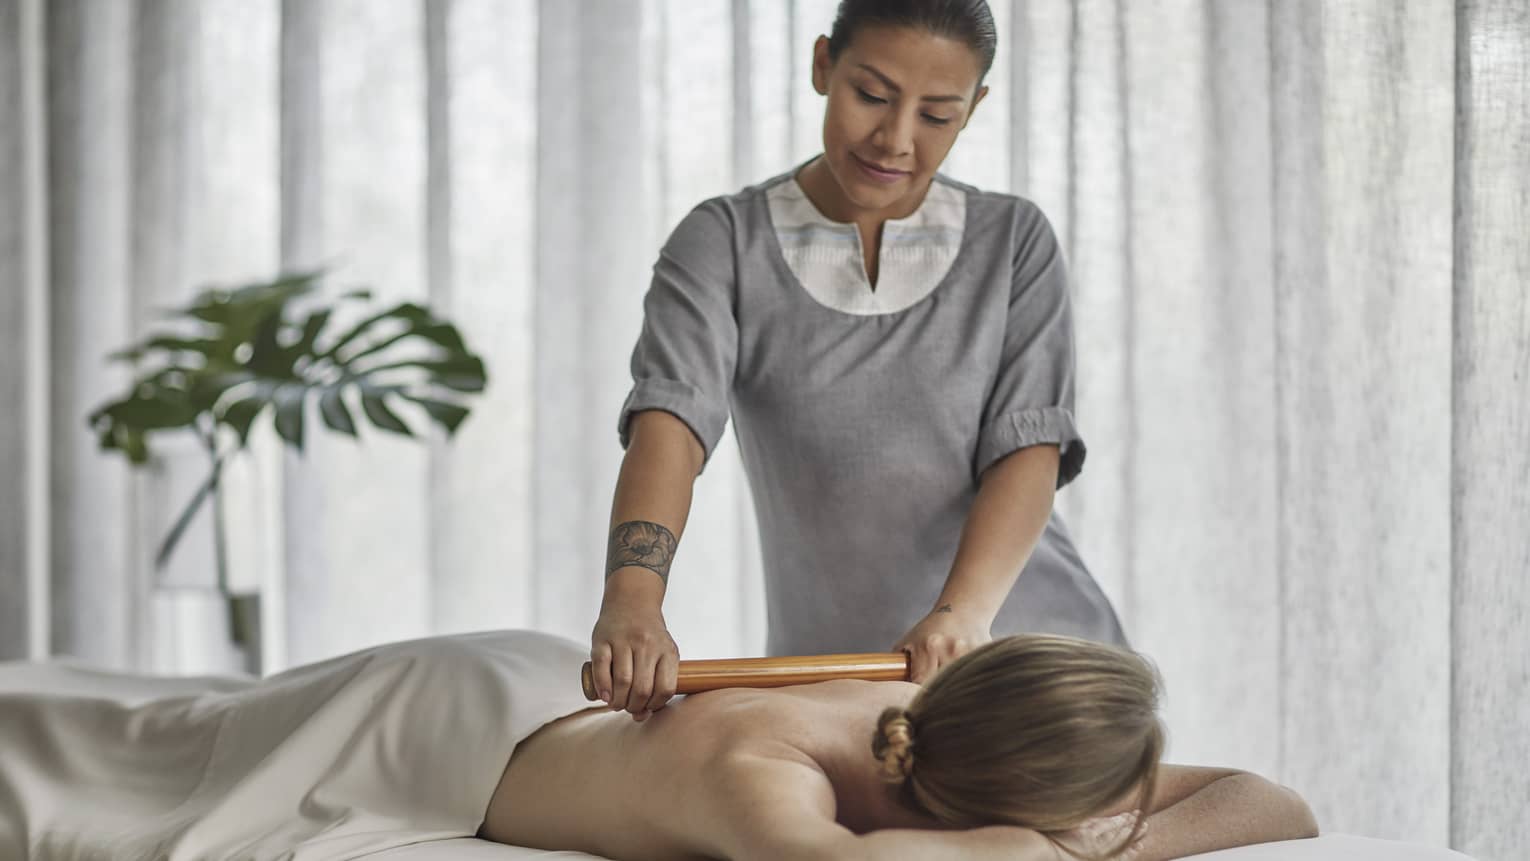 Spa therapist wearing a grey tunic rolls a wooden roller on the bare back of a guest who is laying on a massage table 